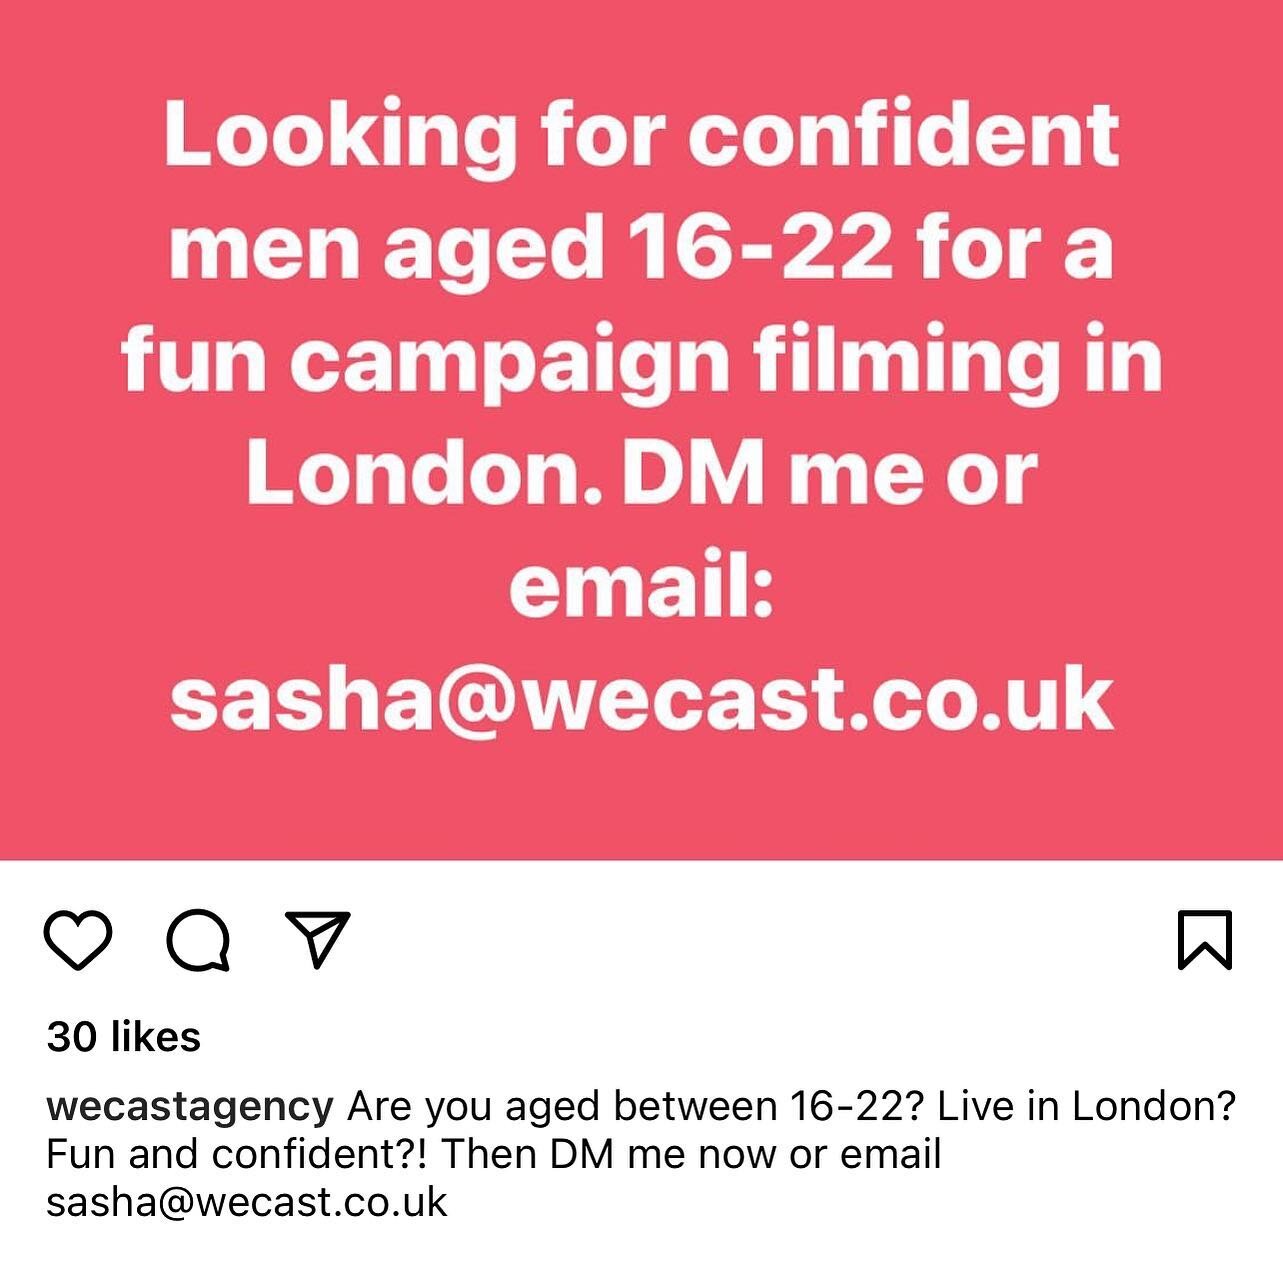 ** CASTING - LONDON **

16-22 and identify as male? Get in touch with Sasha at WeCast #london #casting #castingcall #millennial #casting #cast #loveisland #tv #beontv #tvcasting